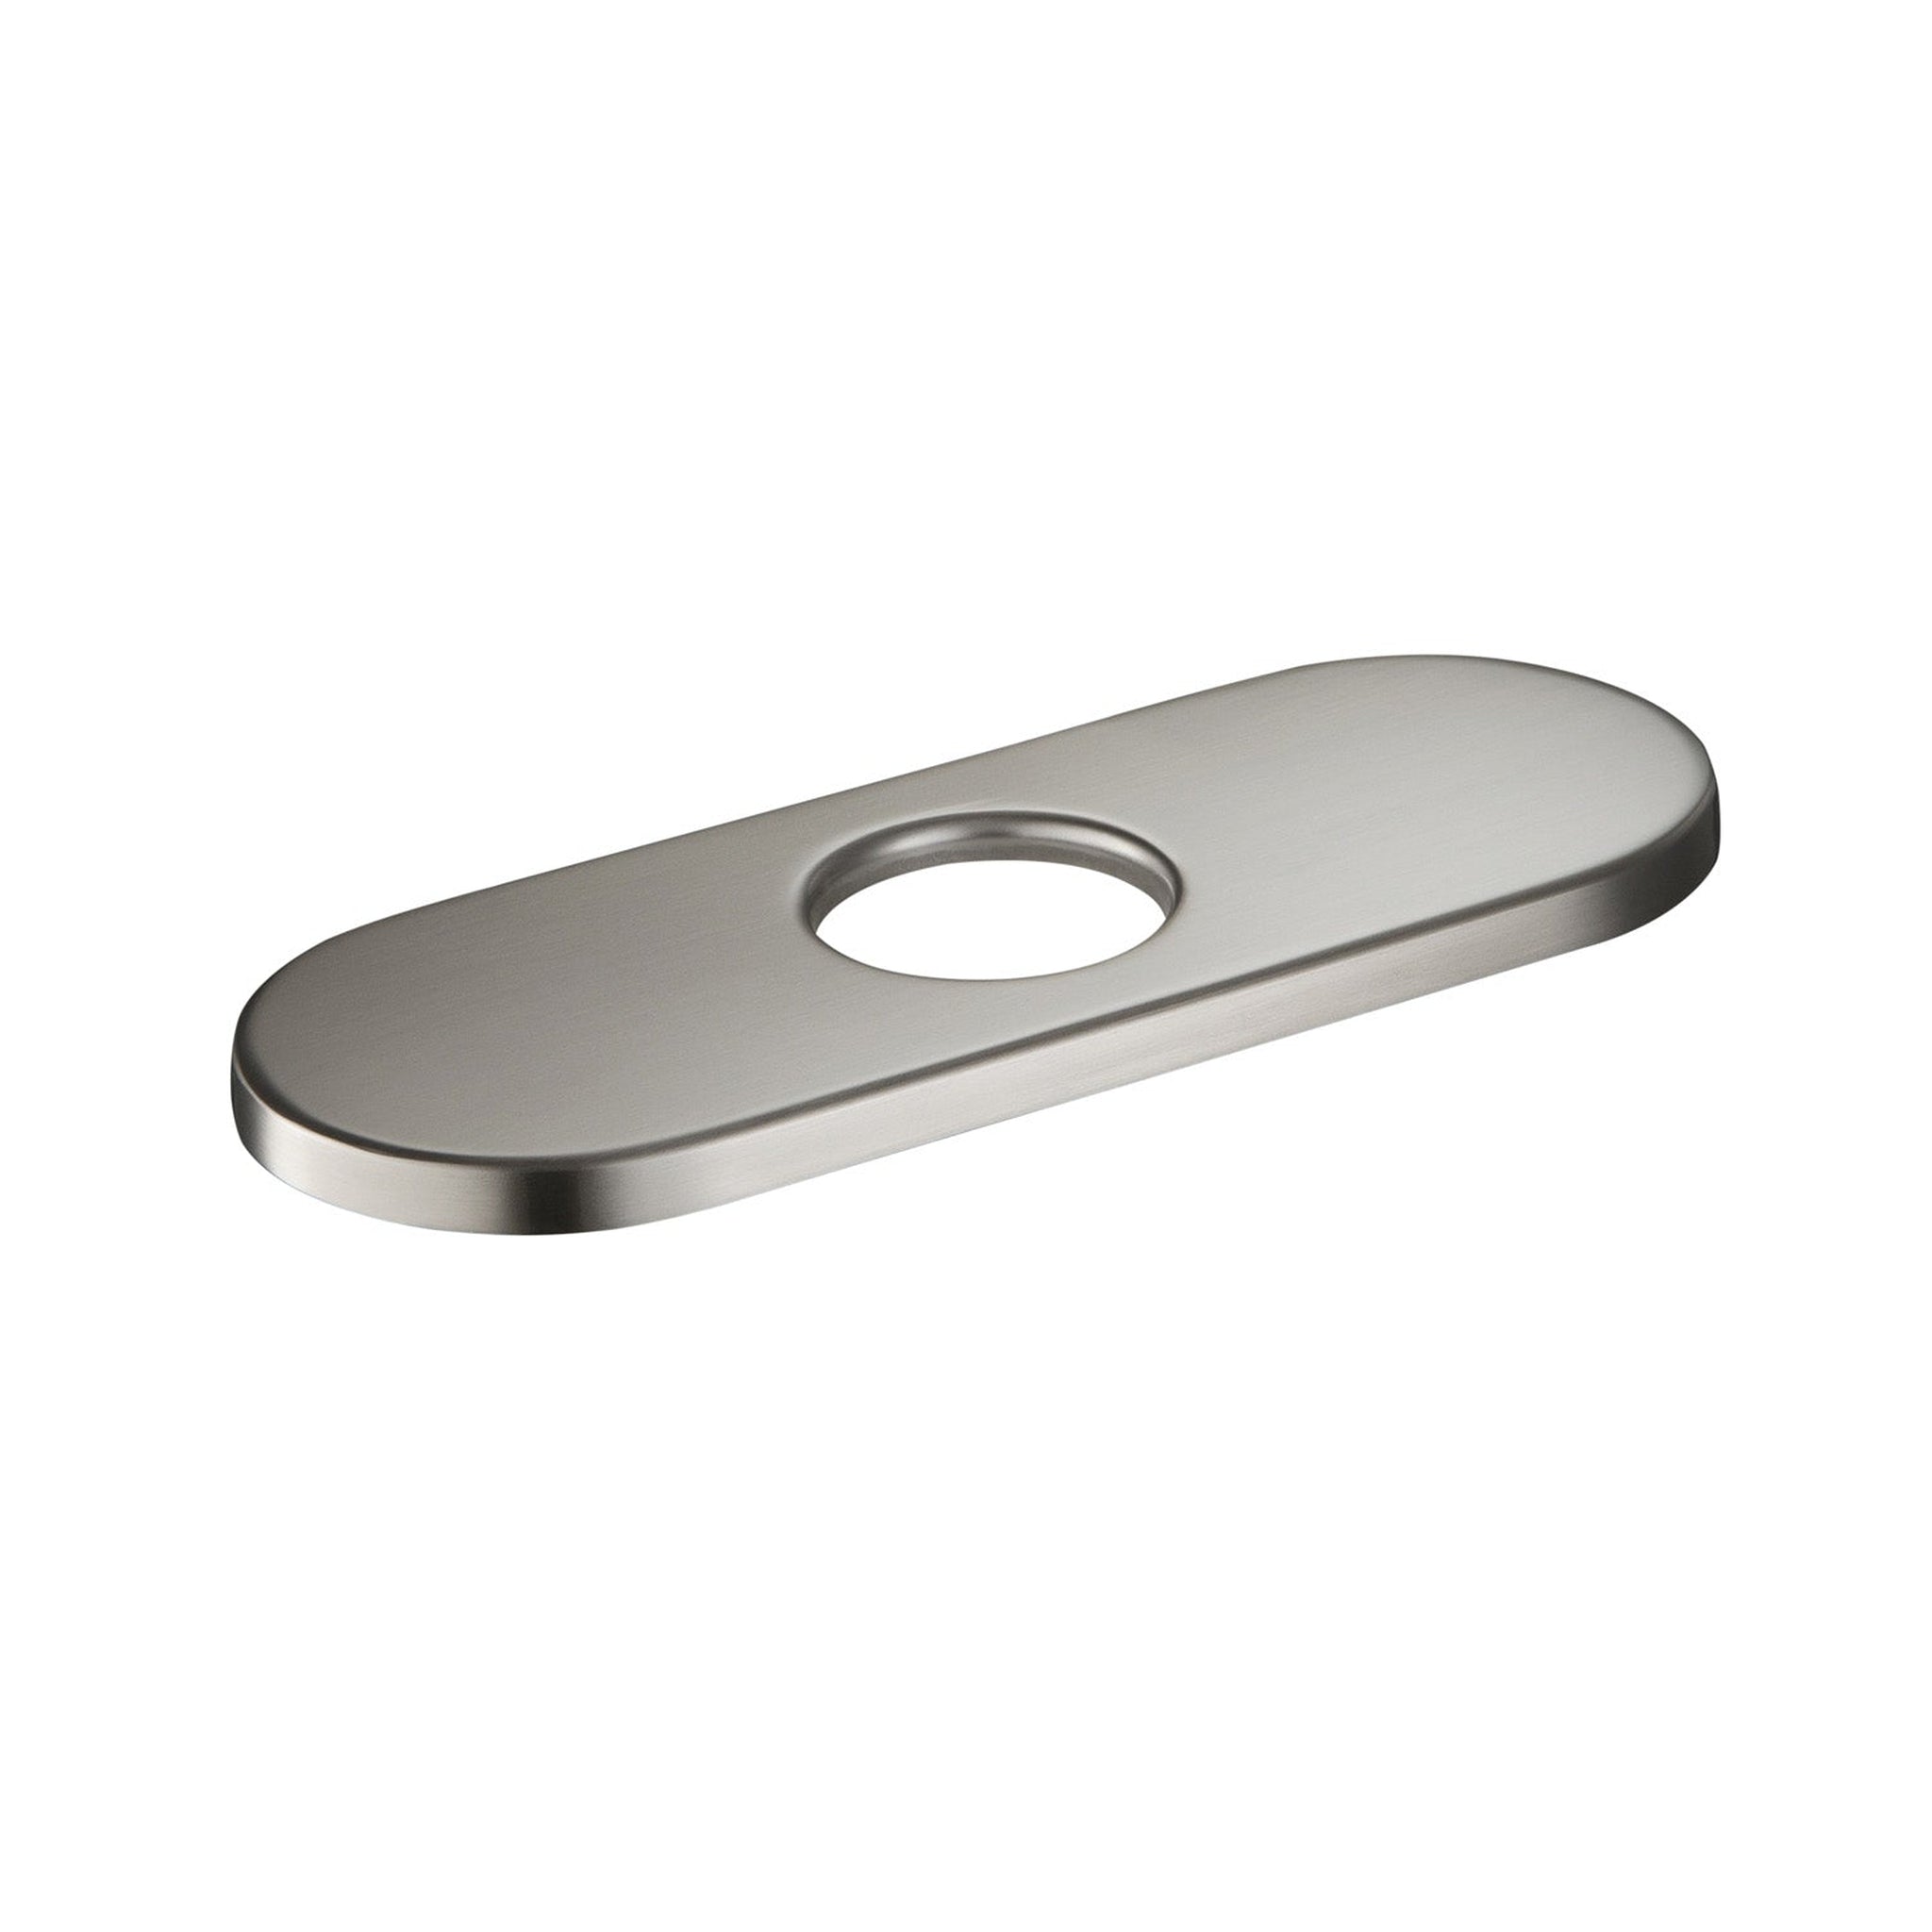 KIBI, KIBI 6" Stainless Steel Faucet Hole Cover in Brushed Nickel Finish